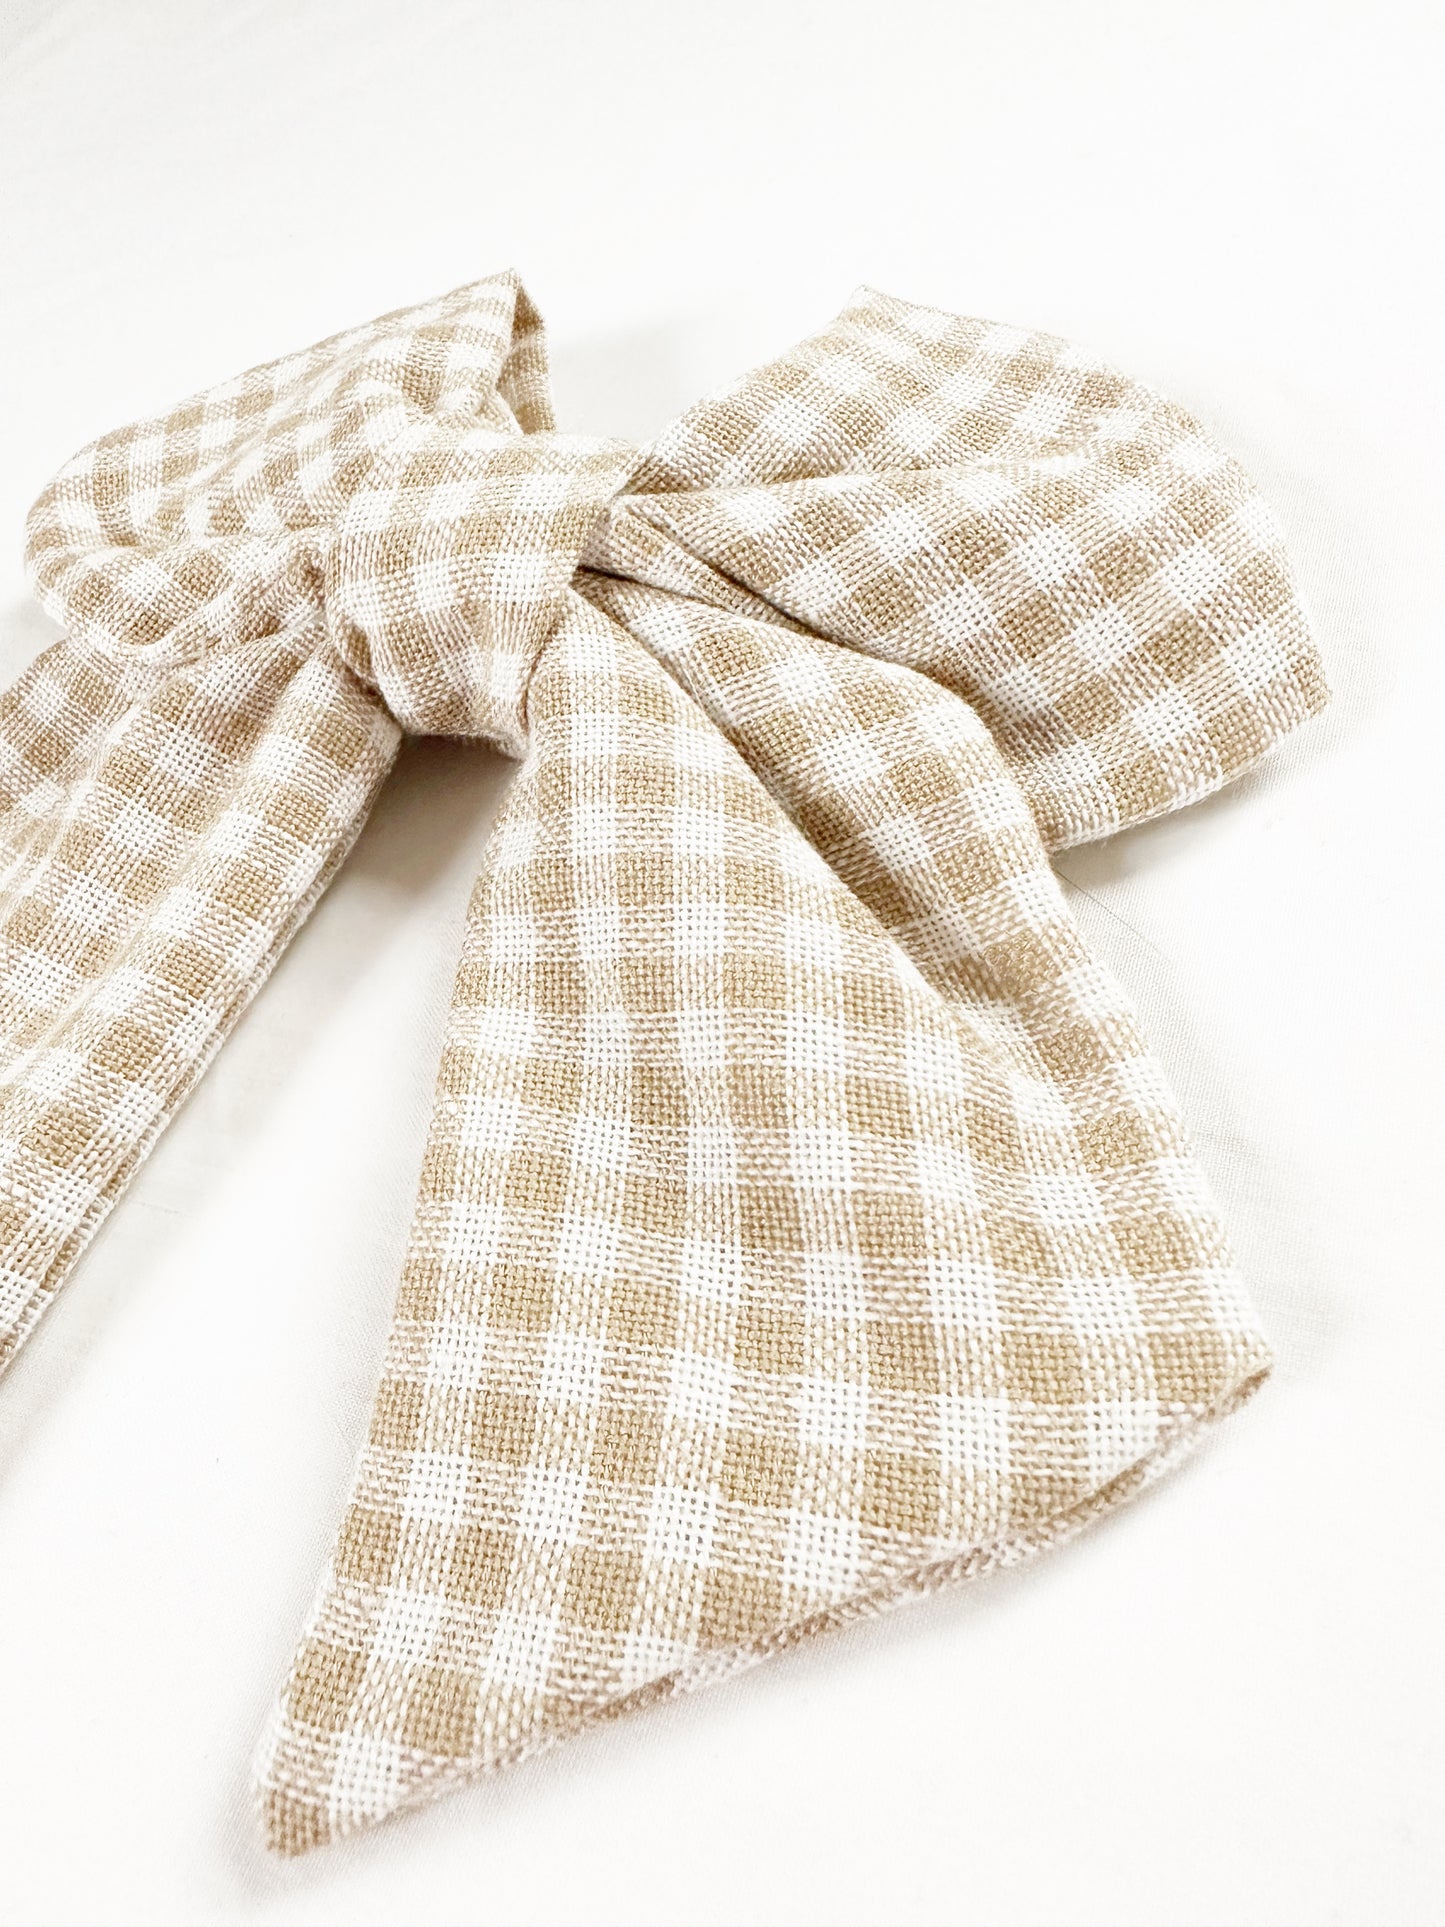 Hair Bow in taupe gingham linen